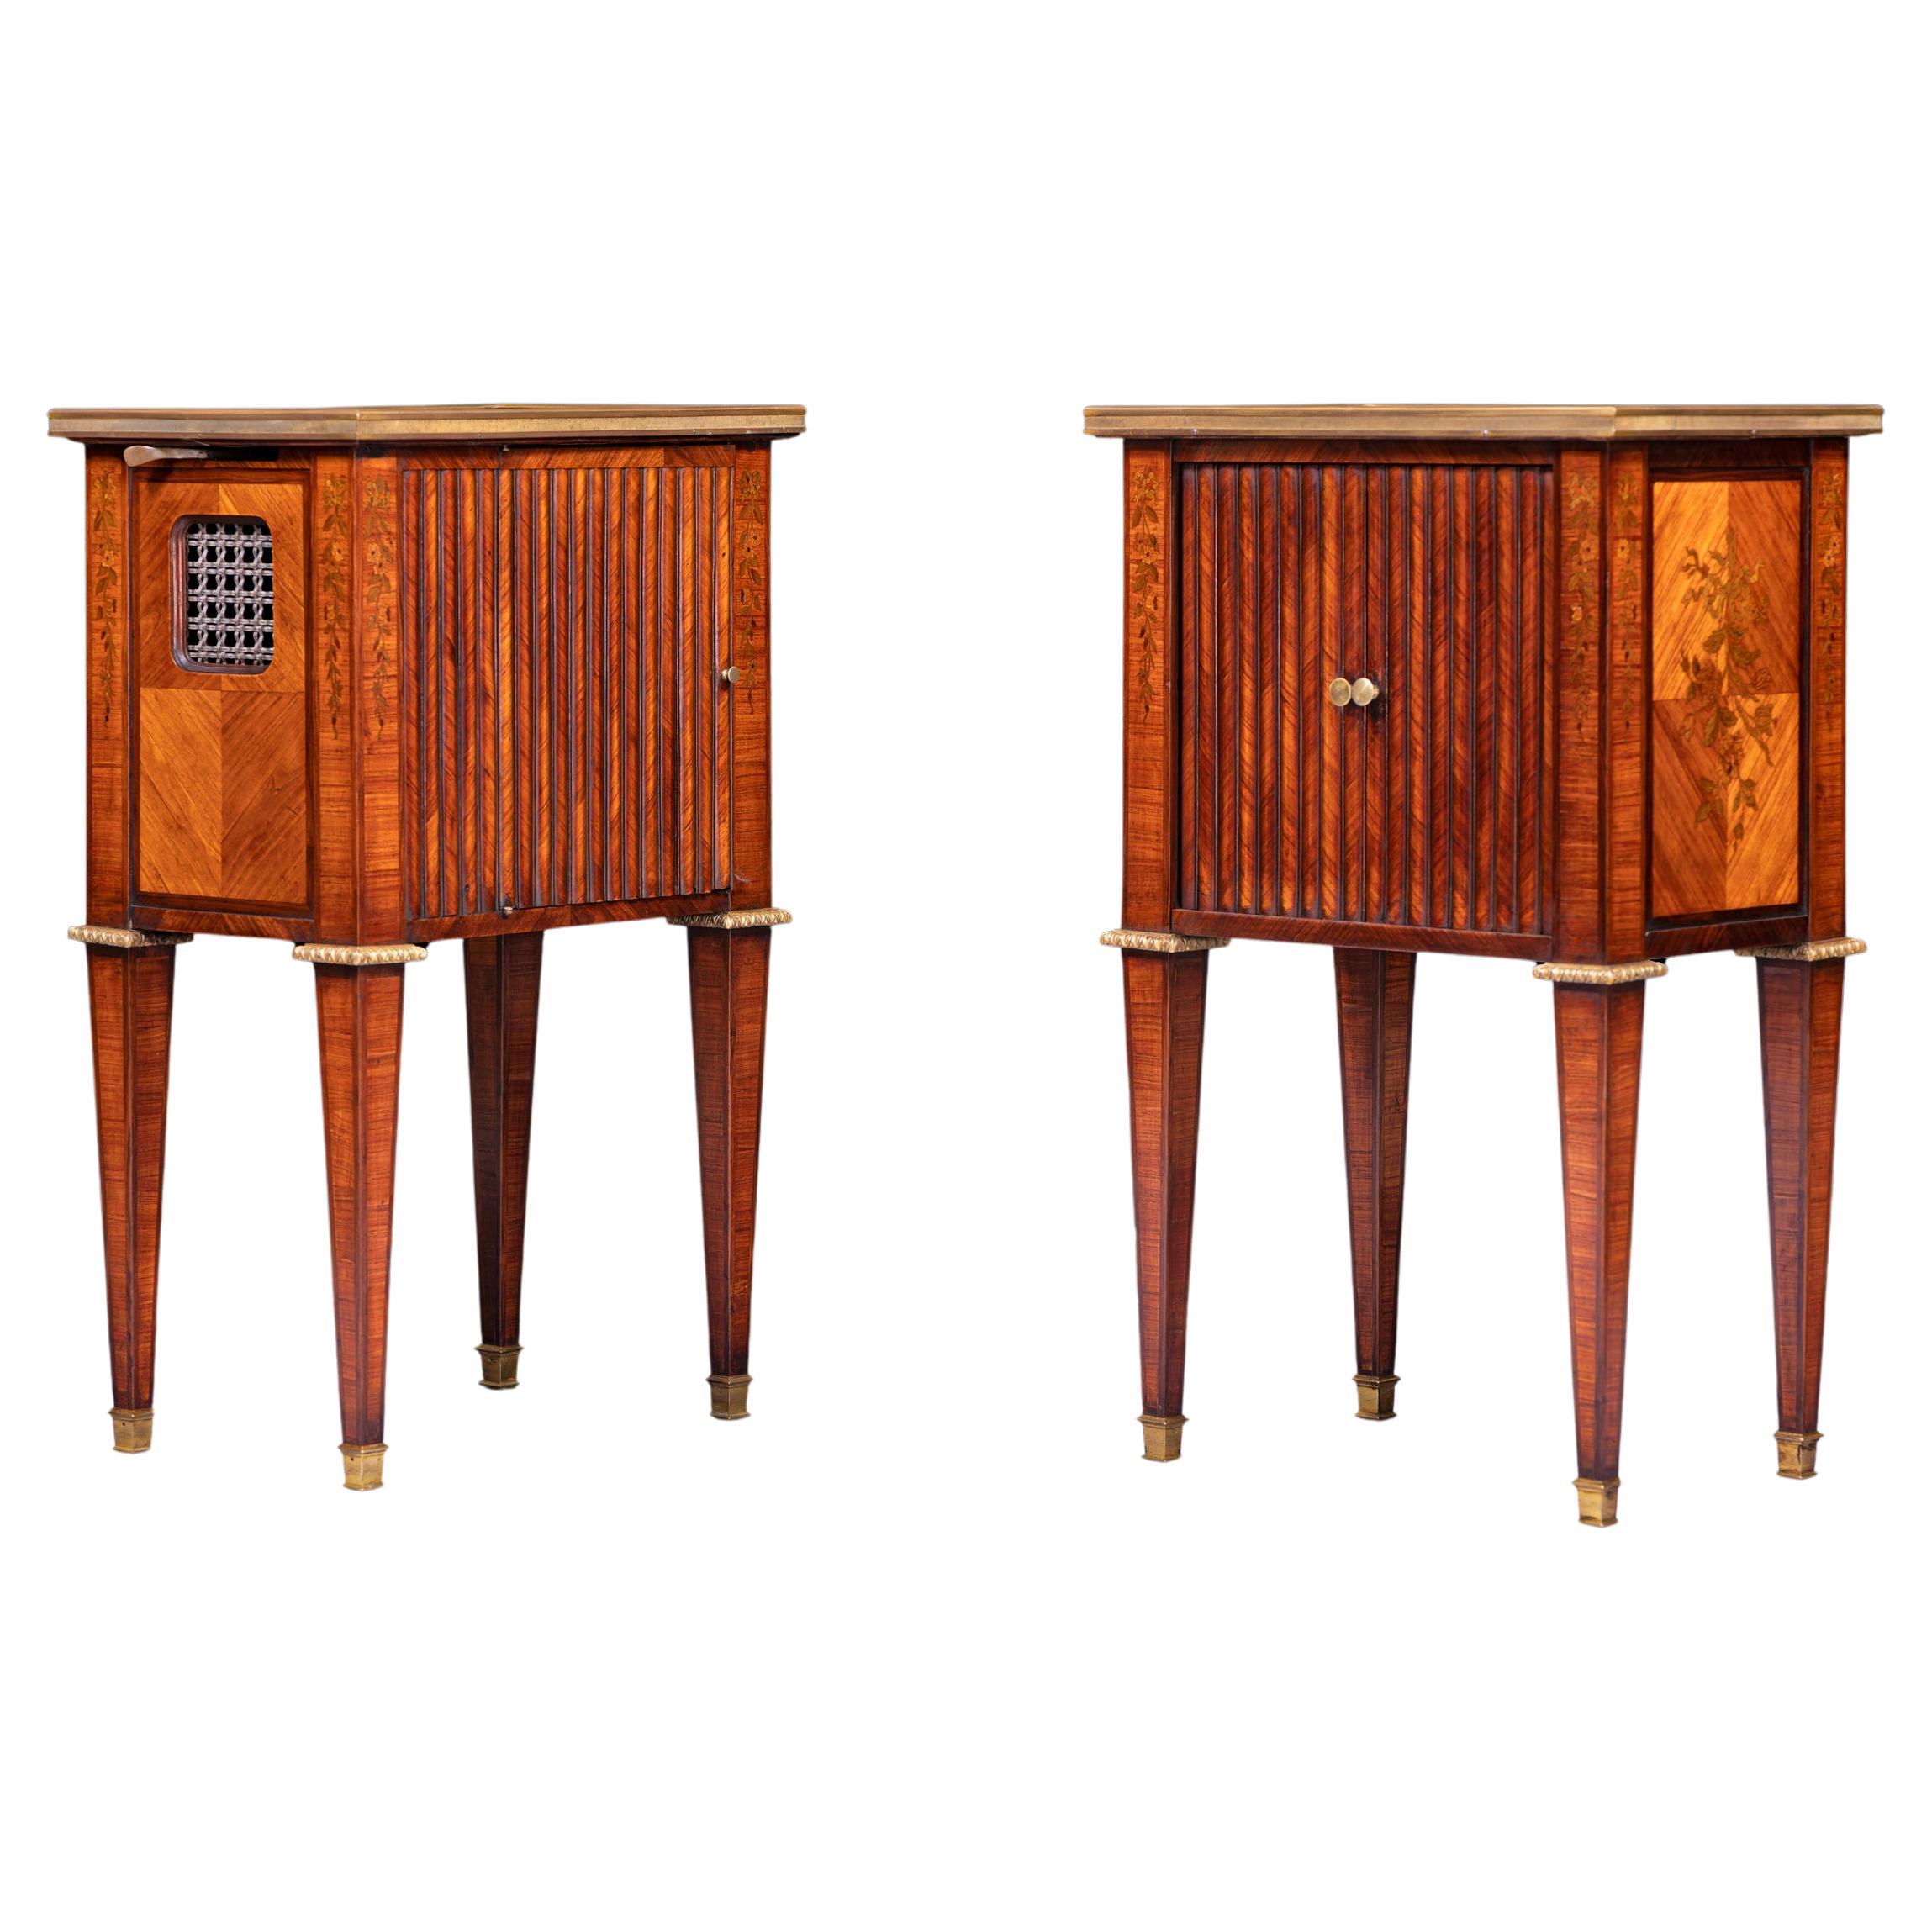 Pair of 19th Century French Kingwood & Ormolu Bedside Cabinets